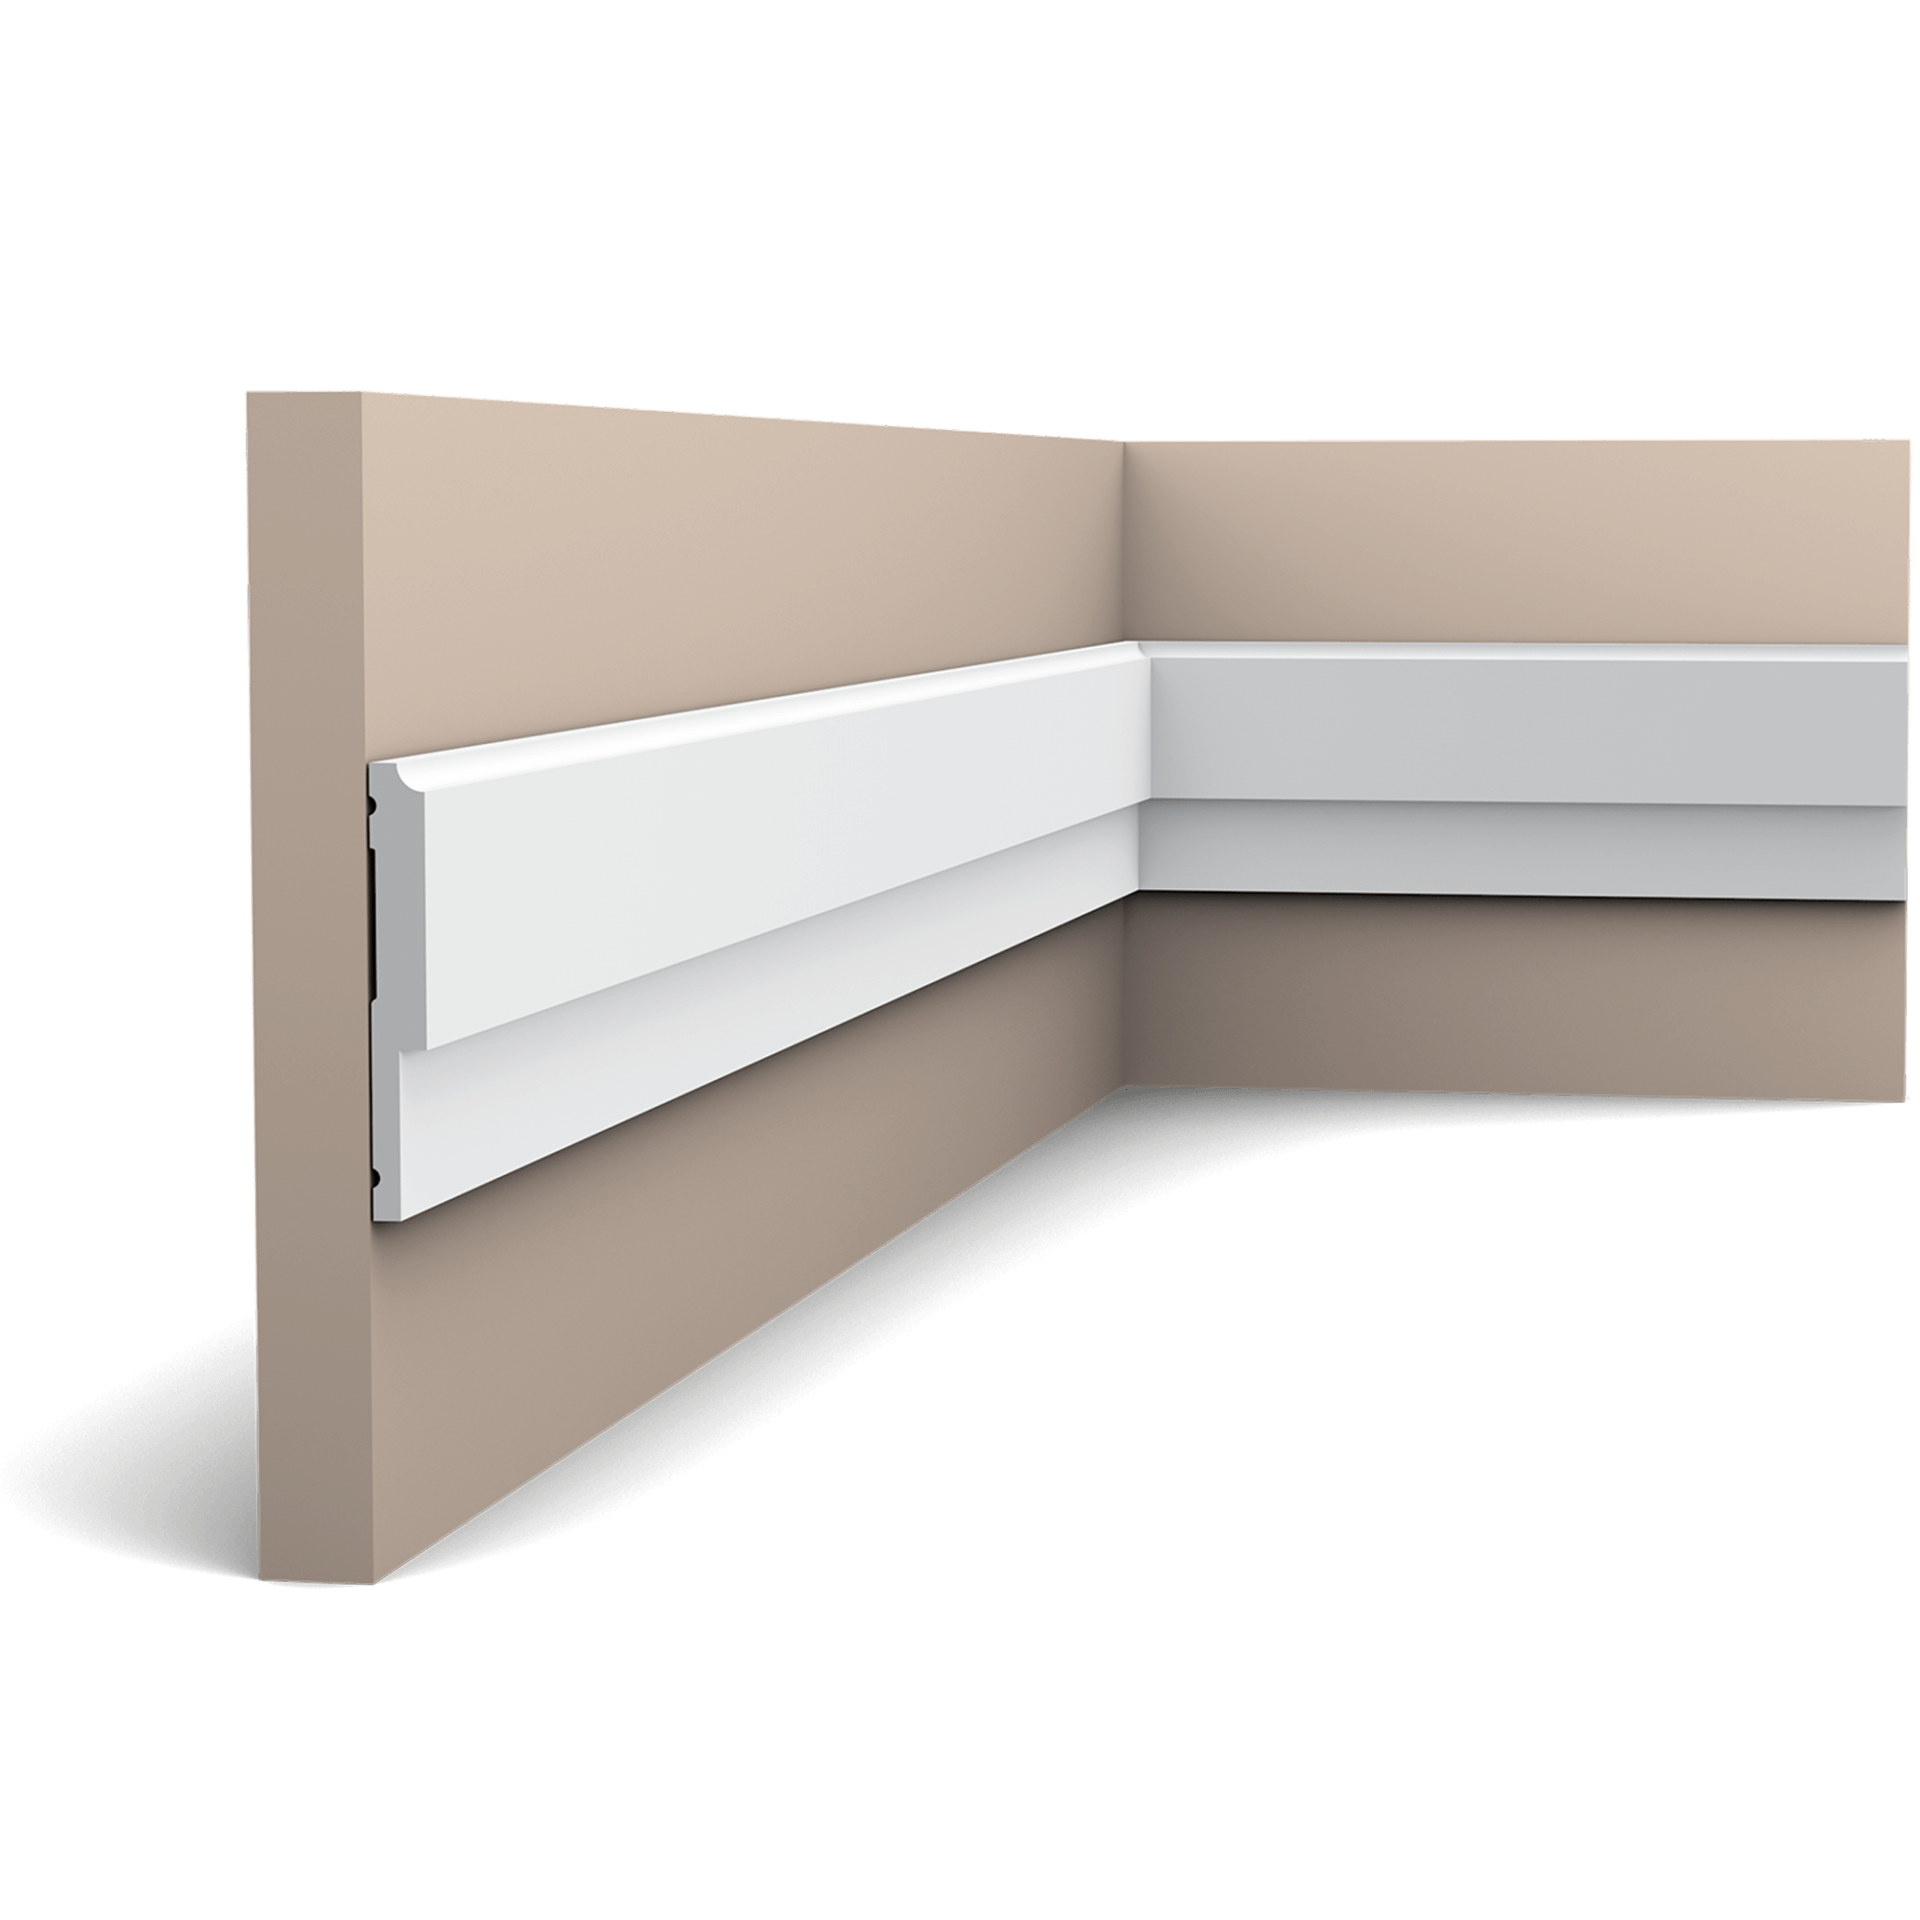 p9900 panel moulding fbec This stepped profile is a great way to provide depth to flat cornice mouldings. Suitable for mounting on both walls and ceilings.